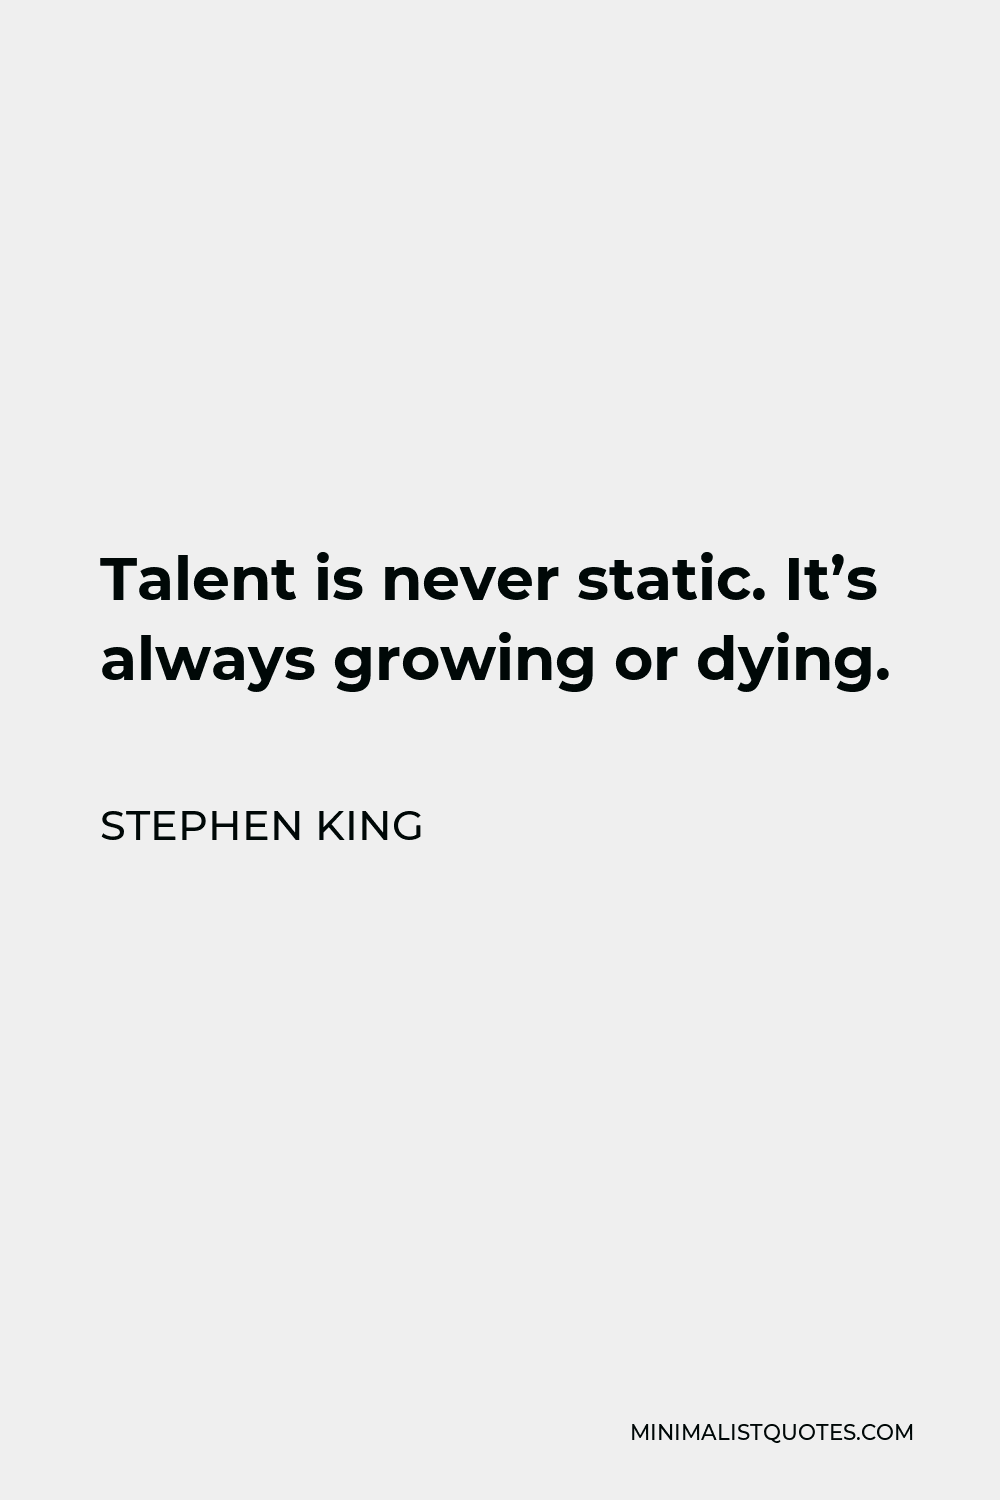 Stephen King Quote - Talent is never static. It’s always growing or dying.